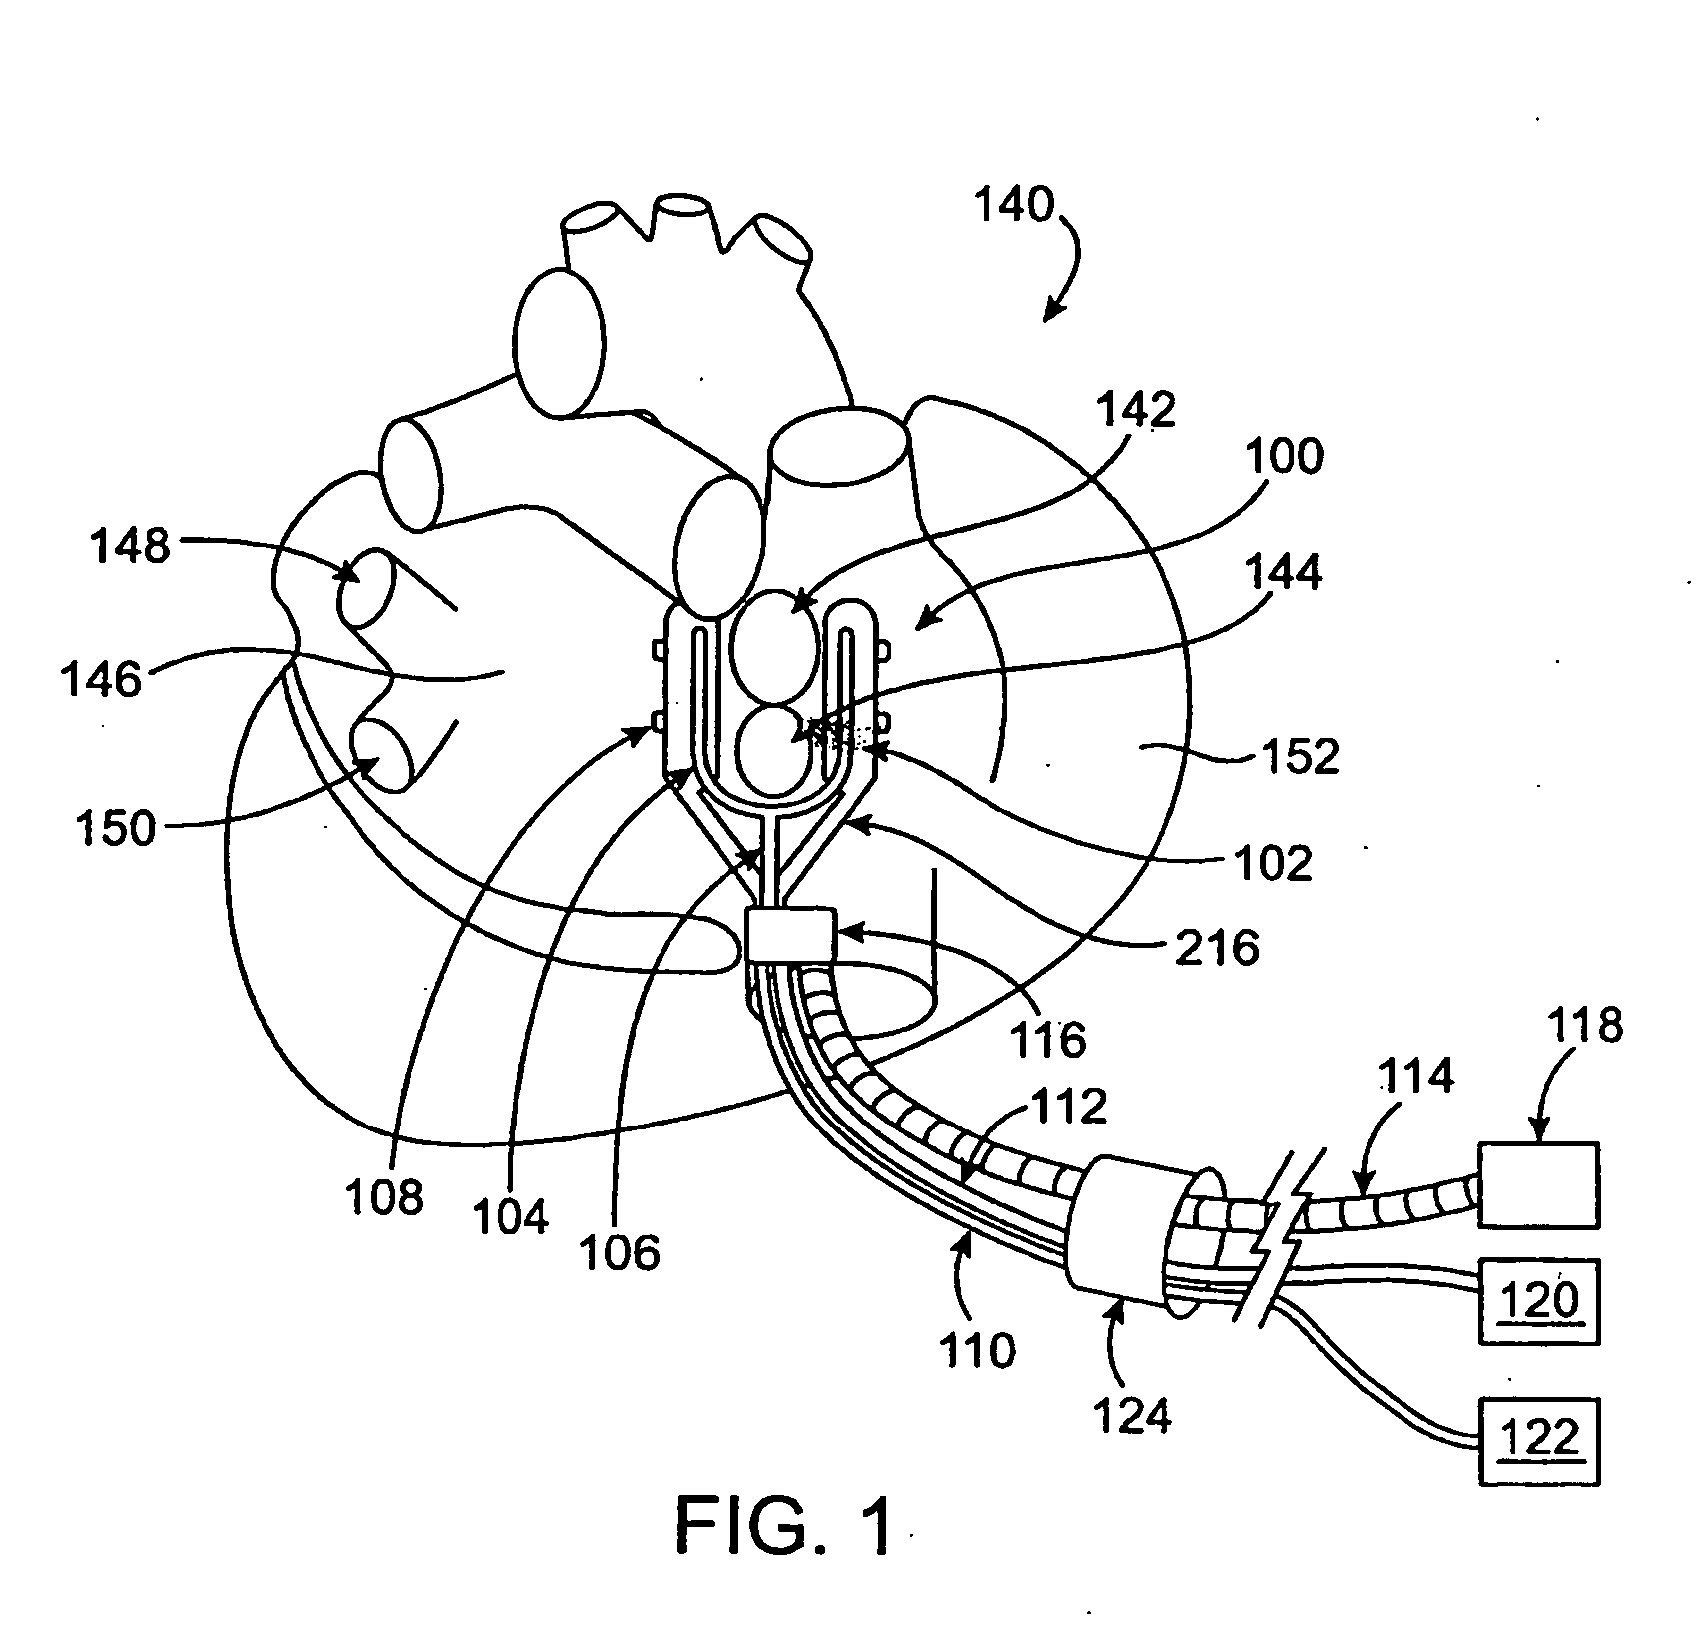 Cardiac treatment devices and methods